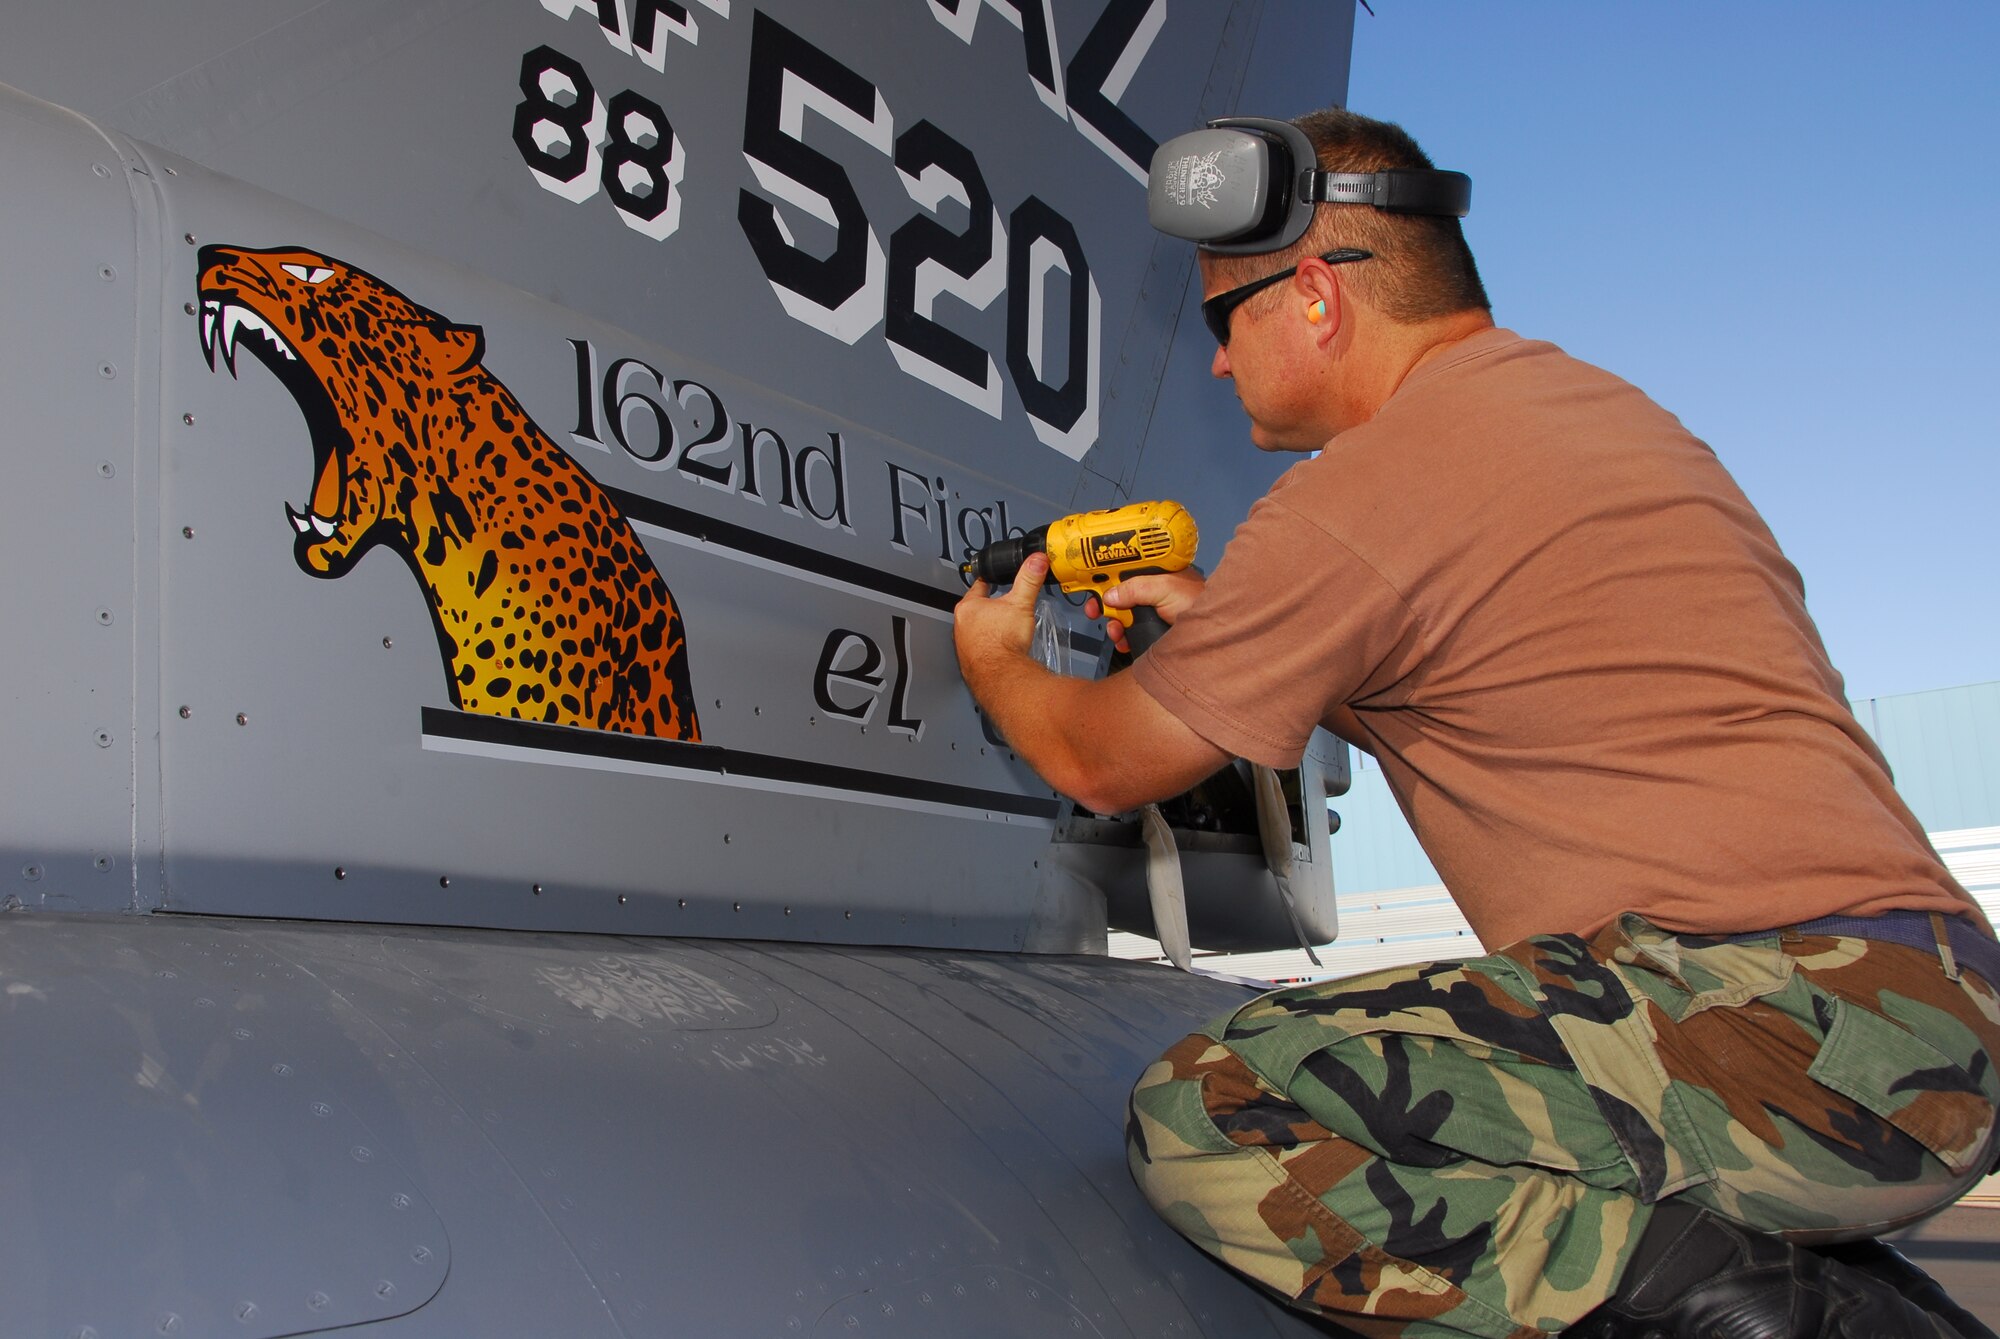 Tech. Sgt. Rick Bain attaches a freshly-painted tailflash to the 162nd Fighter Wing commander's F-16 on the flightline here Nov. 1. The panel features the unit mascot "El Tigre," a jaguar native to the Sonoran desert. The roaring "tigre" was painted by Staff Sgt. Aaron Roop, a structural maintainer, and designed by Senior Airman Jonathan Rojas, a graphic artist assigned to the wing public affairs office. (Arizona Air National Guard photo by Senior Airman Sarah Elliott)